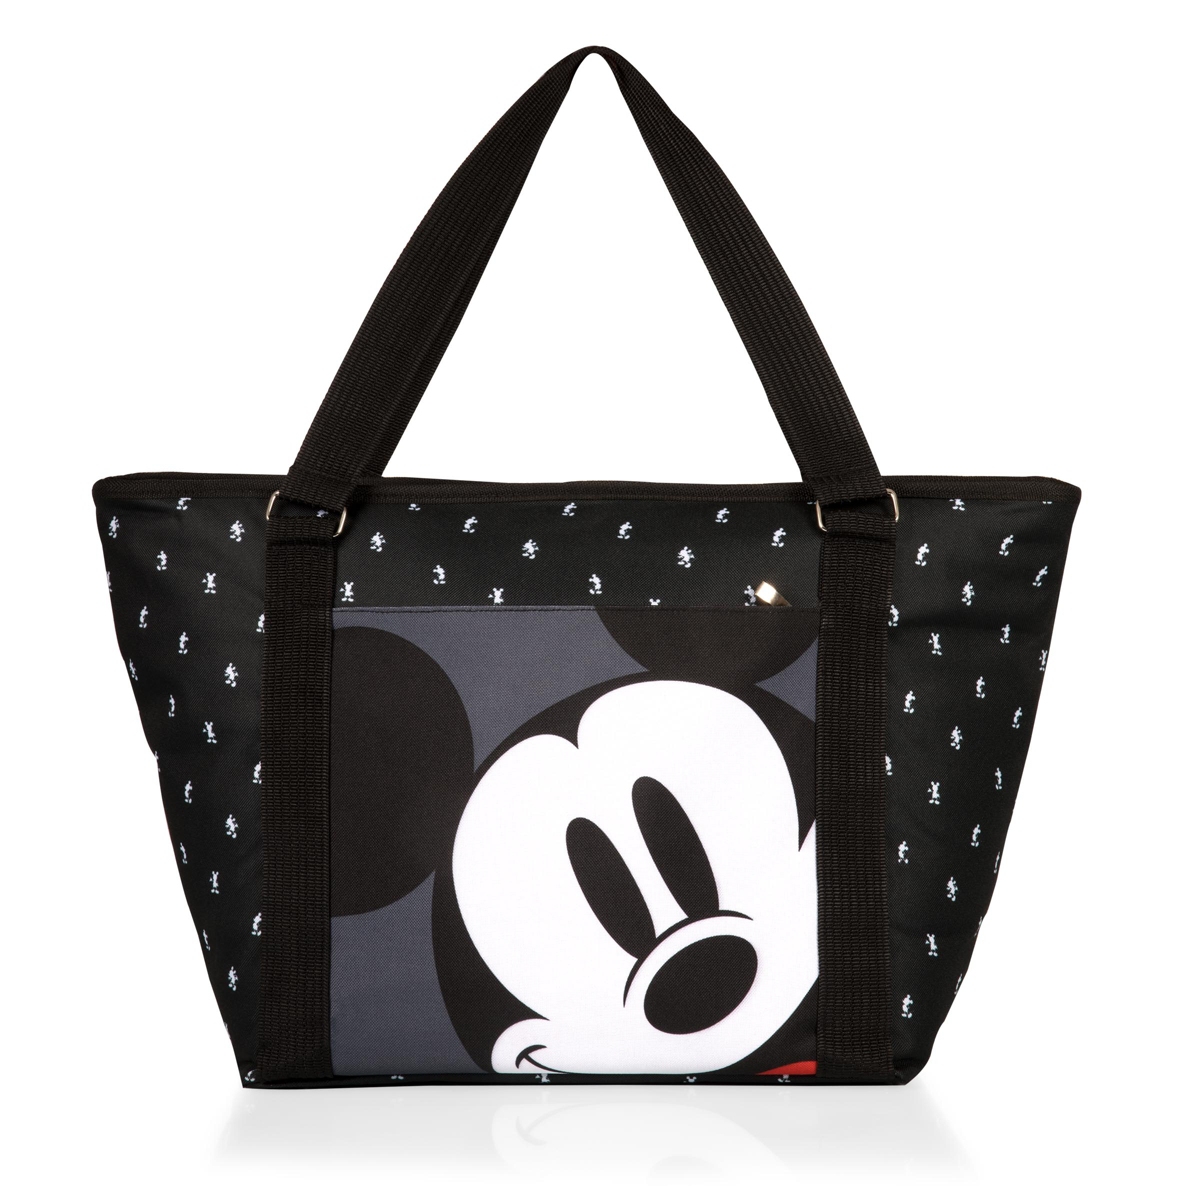 Disney's Mickey Mouse Cooler Tote Bag - Black